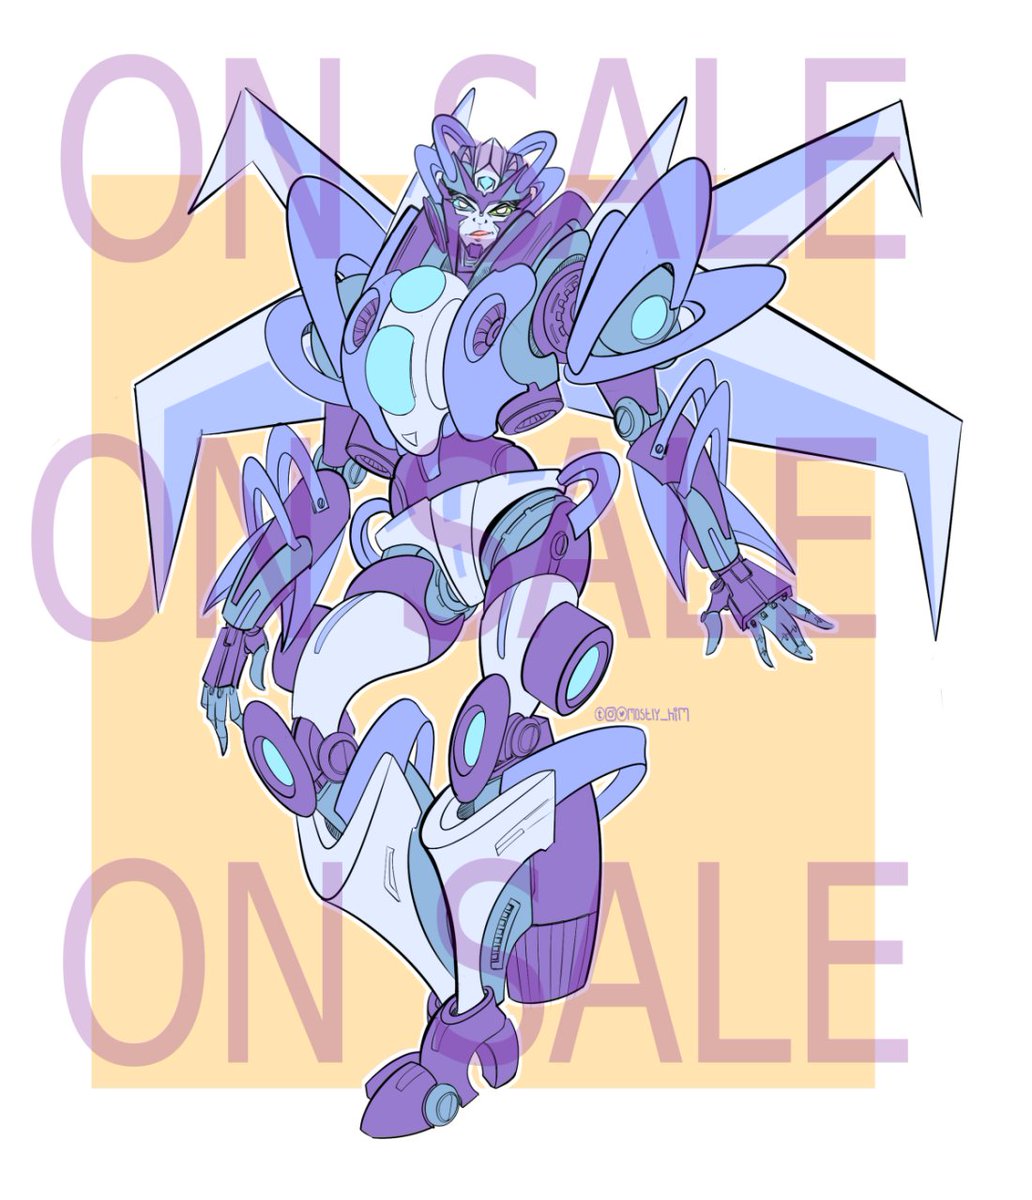 Adoptable on sale!! -You can ask me to change the colors and also to add a faction symbol -Includes clean Lineart + color file in full res Price: $105 usd Send me a message if you are interested 😊 #transformers